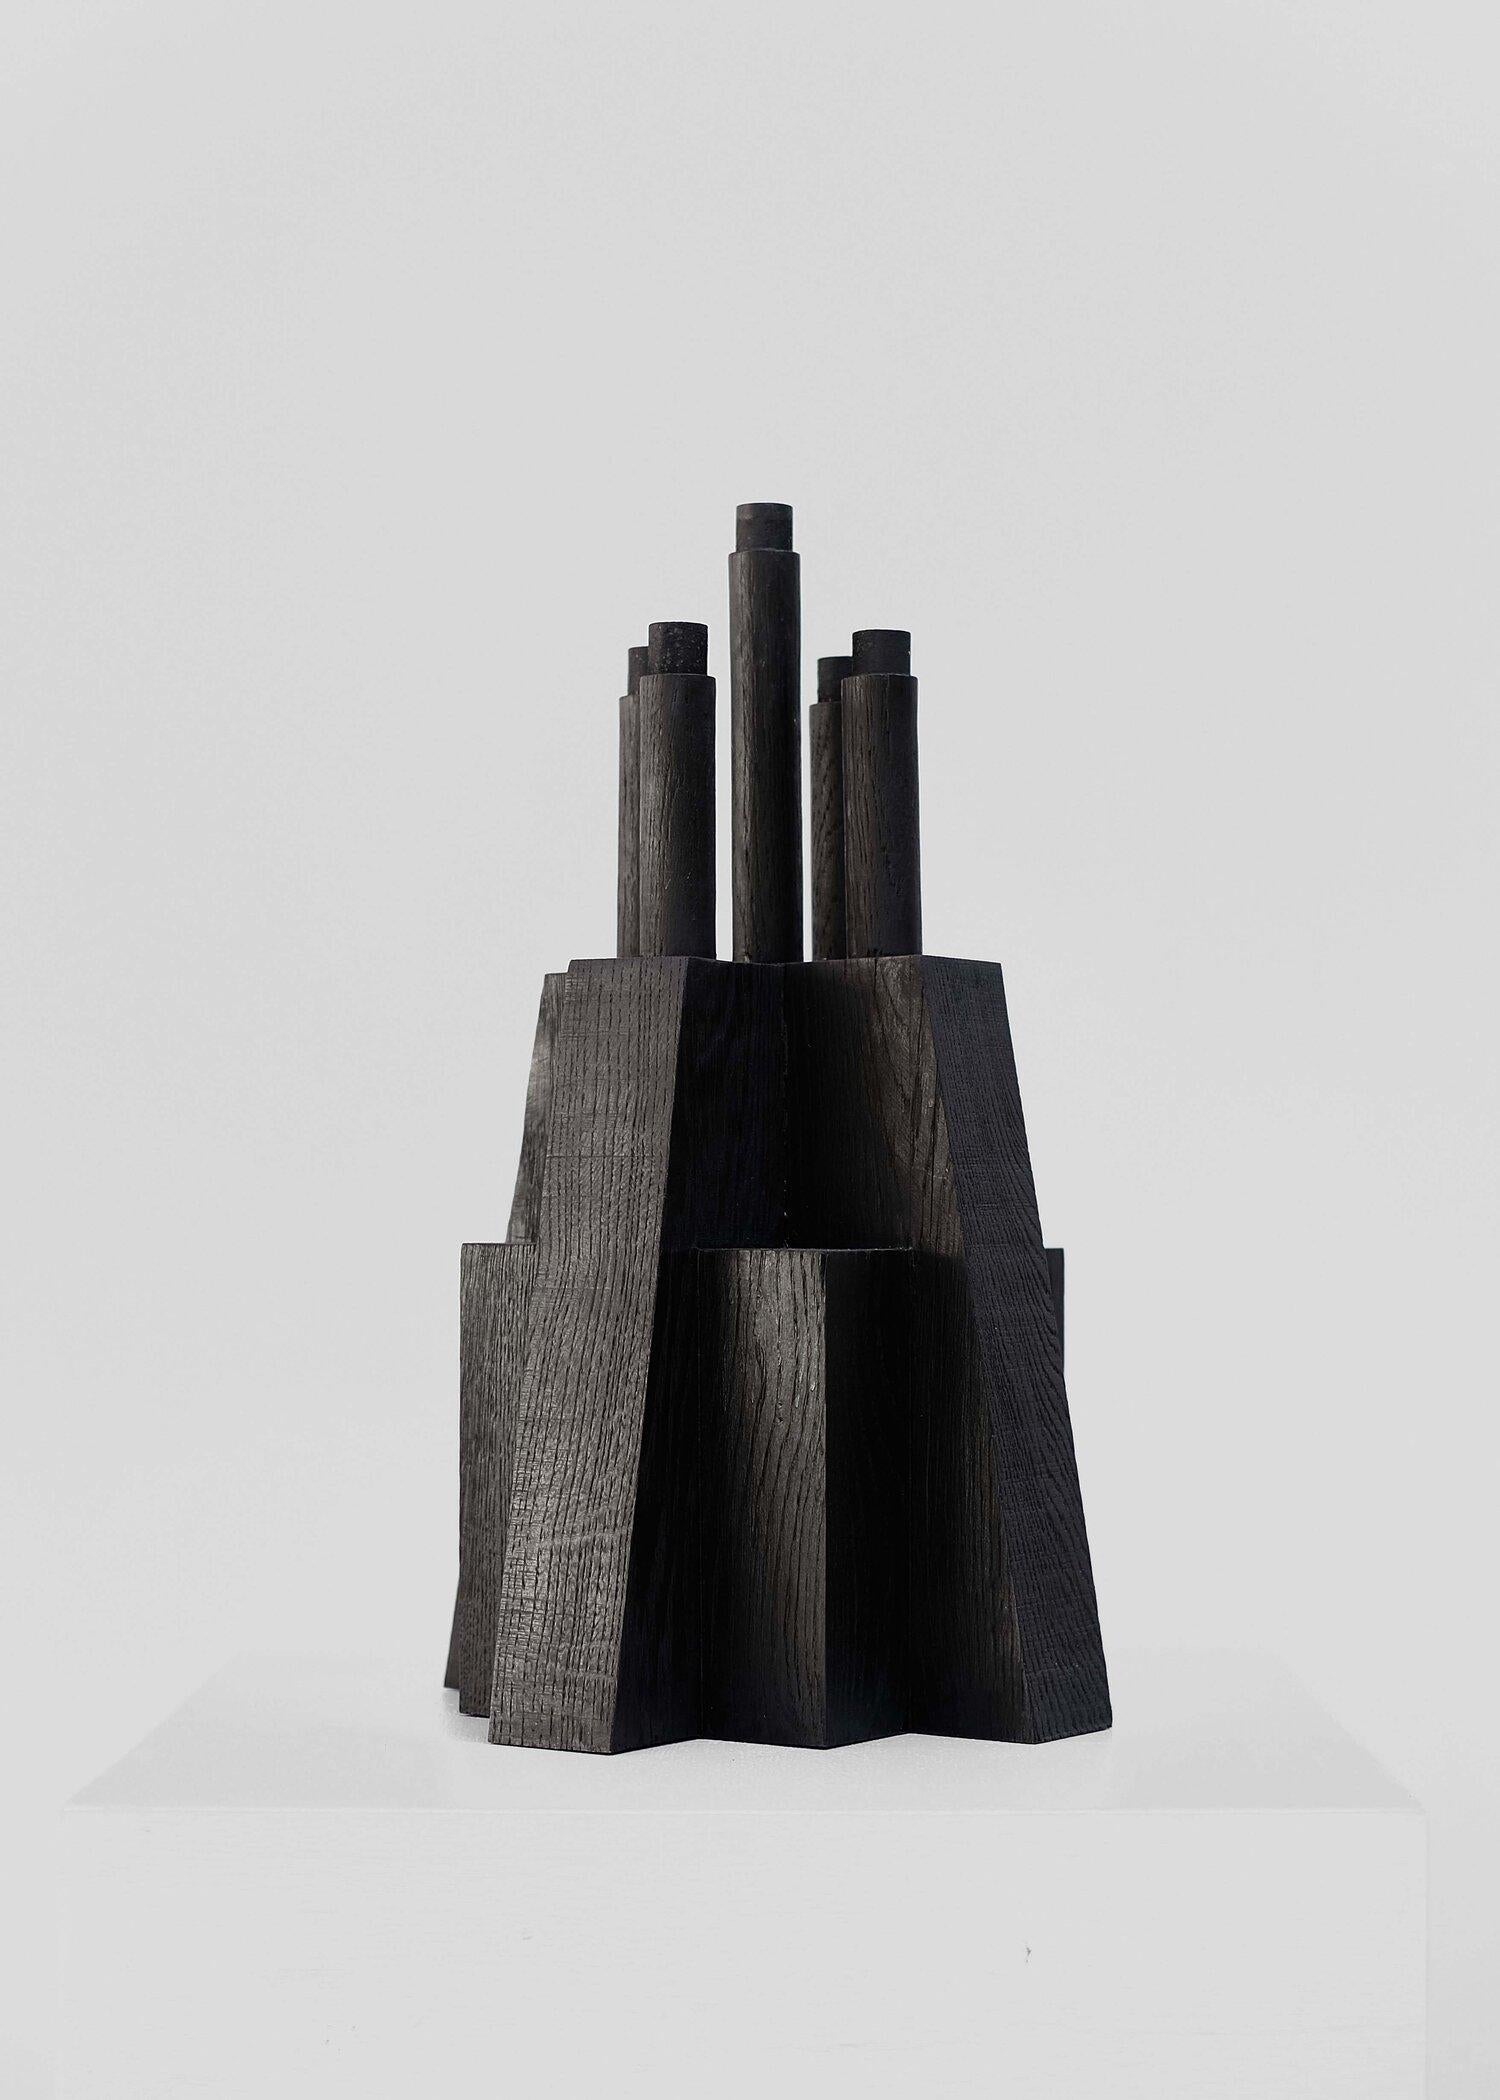 Contemporary black candle holder in oak, bunker by Arno Declercq

Dimensions: W 32 x L 32 x H 50 cm
Materials: Burned and waxed oak

Made by hand, in Belgium.

Arno Declercq
Belgian designer and art dealer who makes bespoke objects with